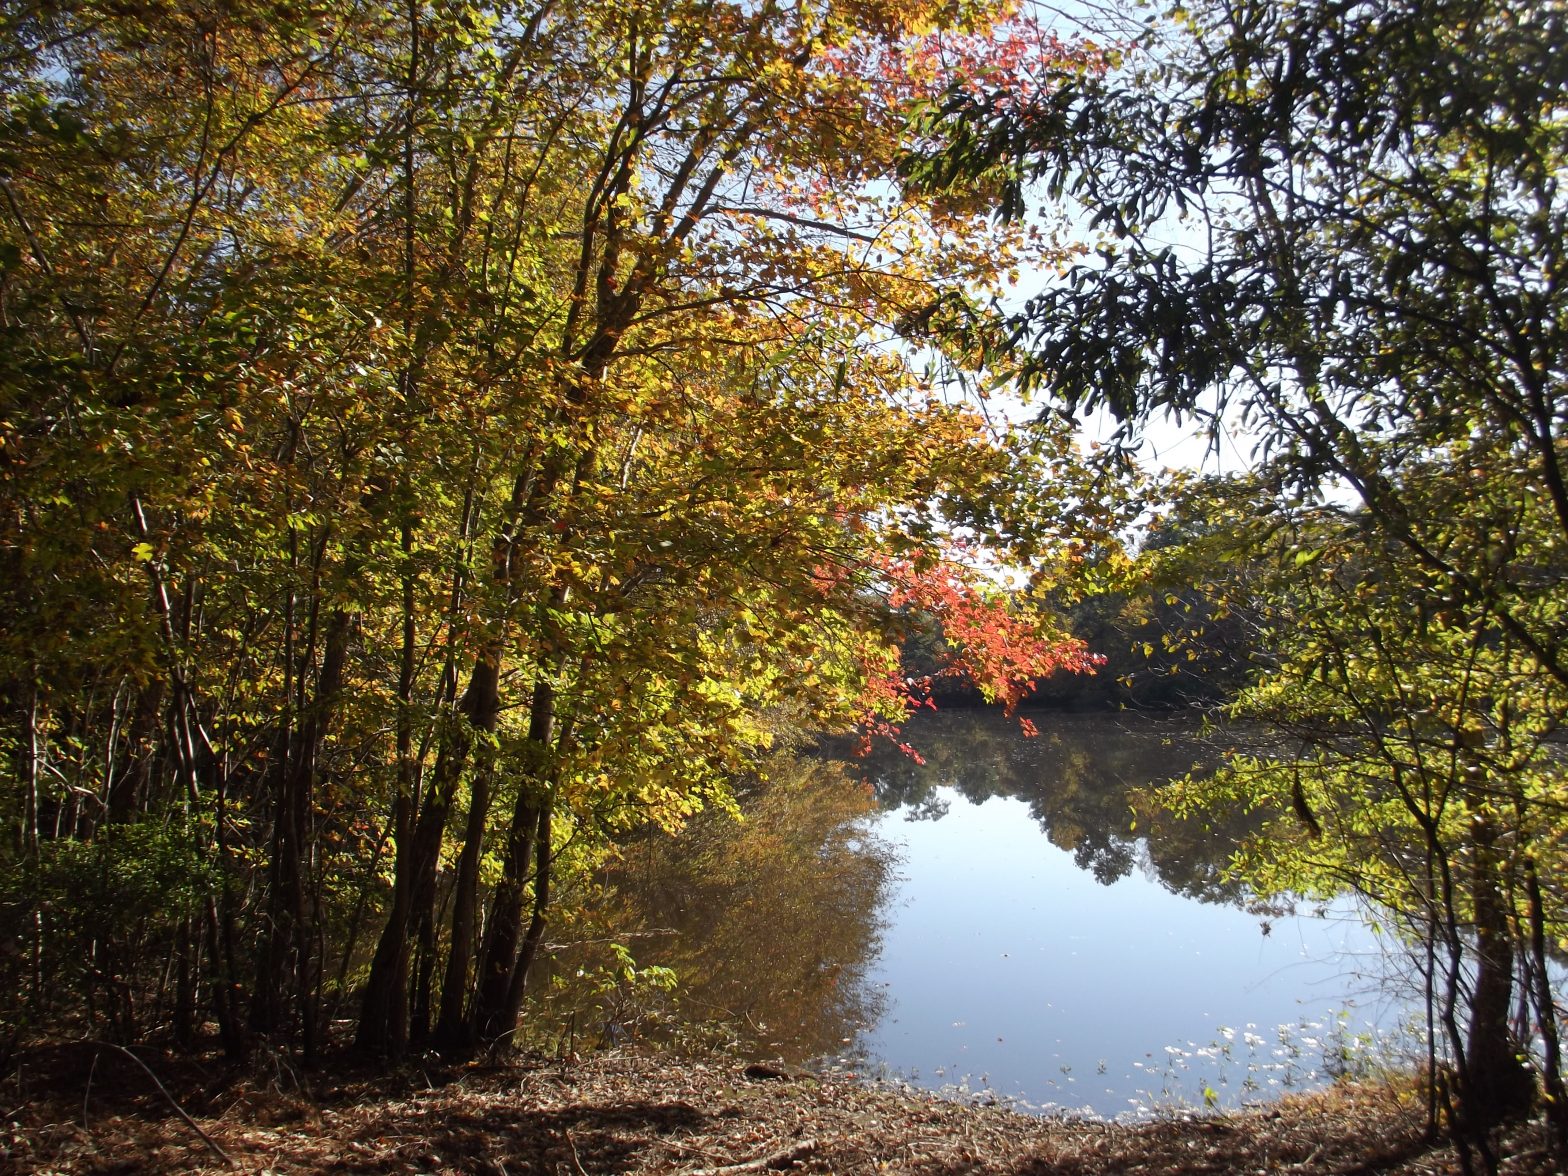 New easement in Southampton supports bat habitat, adds canoe access on the Nottoway River